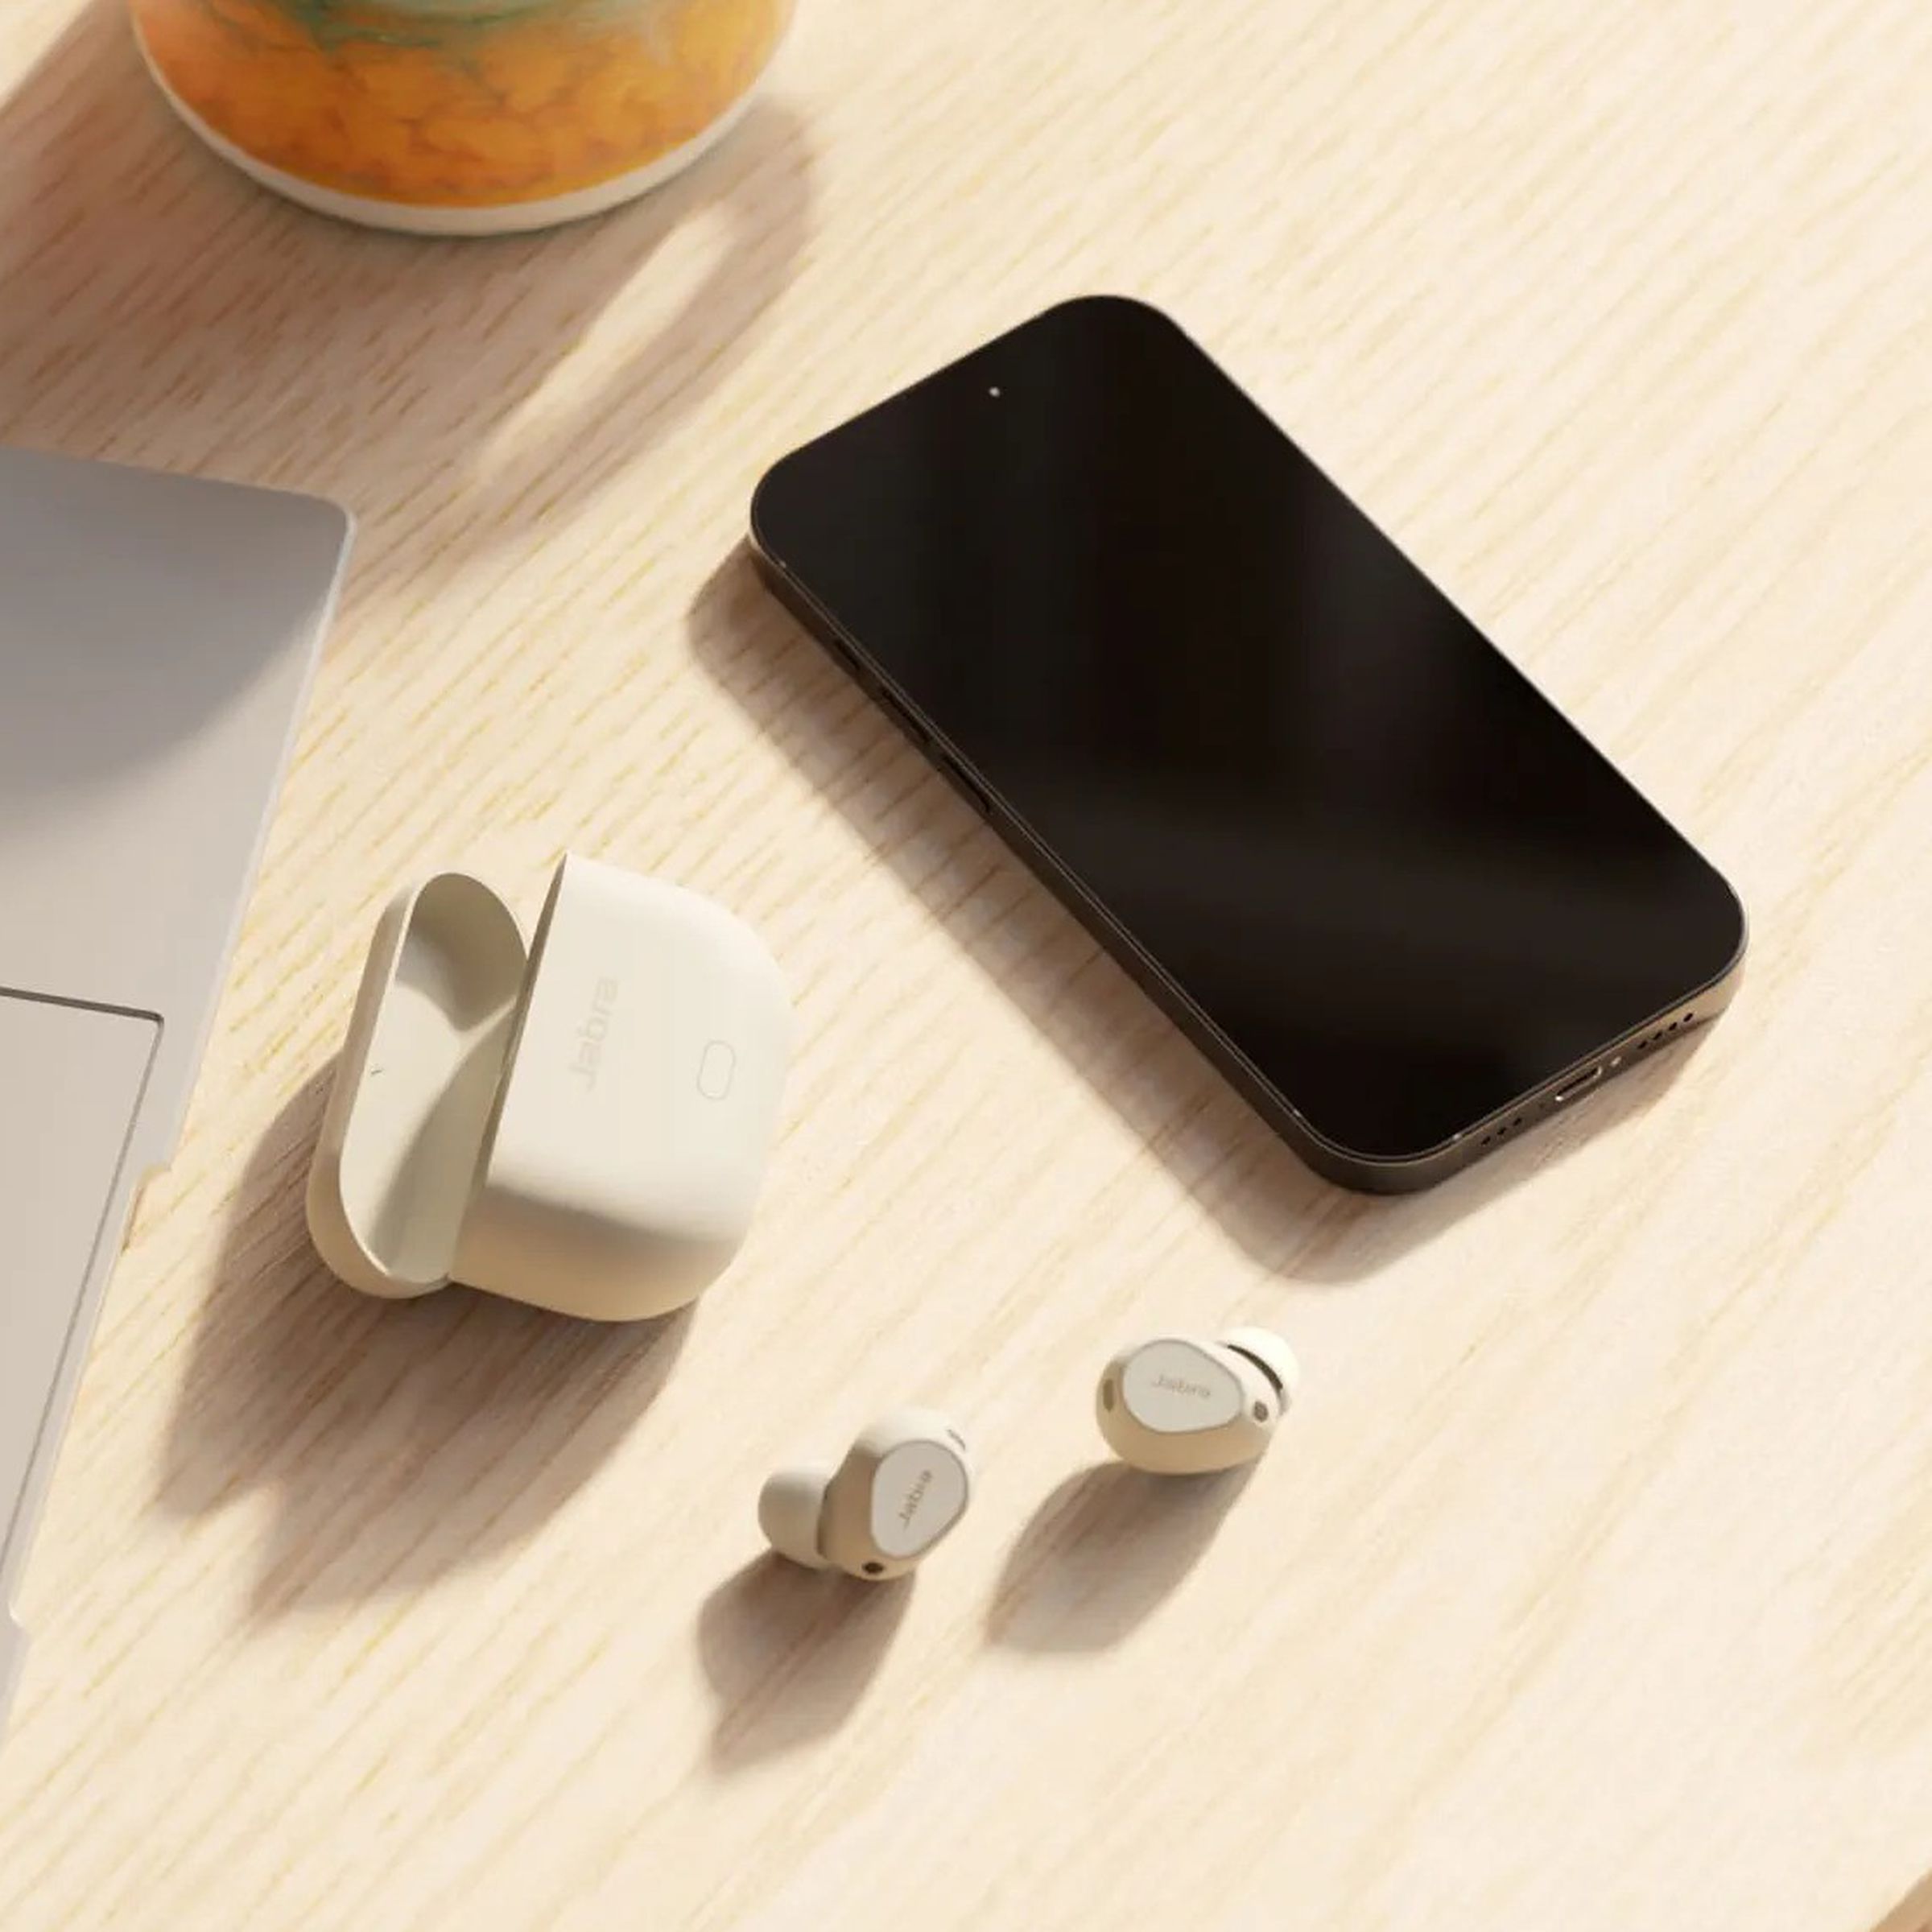 The Jabra Elite 10 gen 2 wireless earbuds on a table besides a laptop and a smartphone.